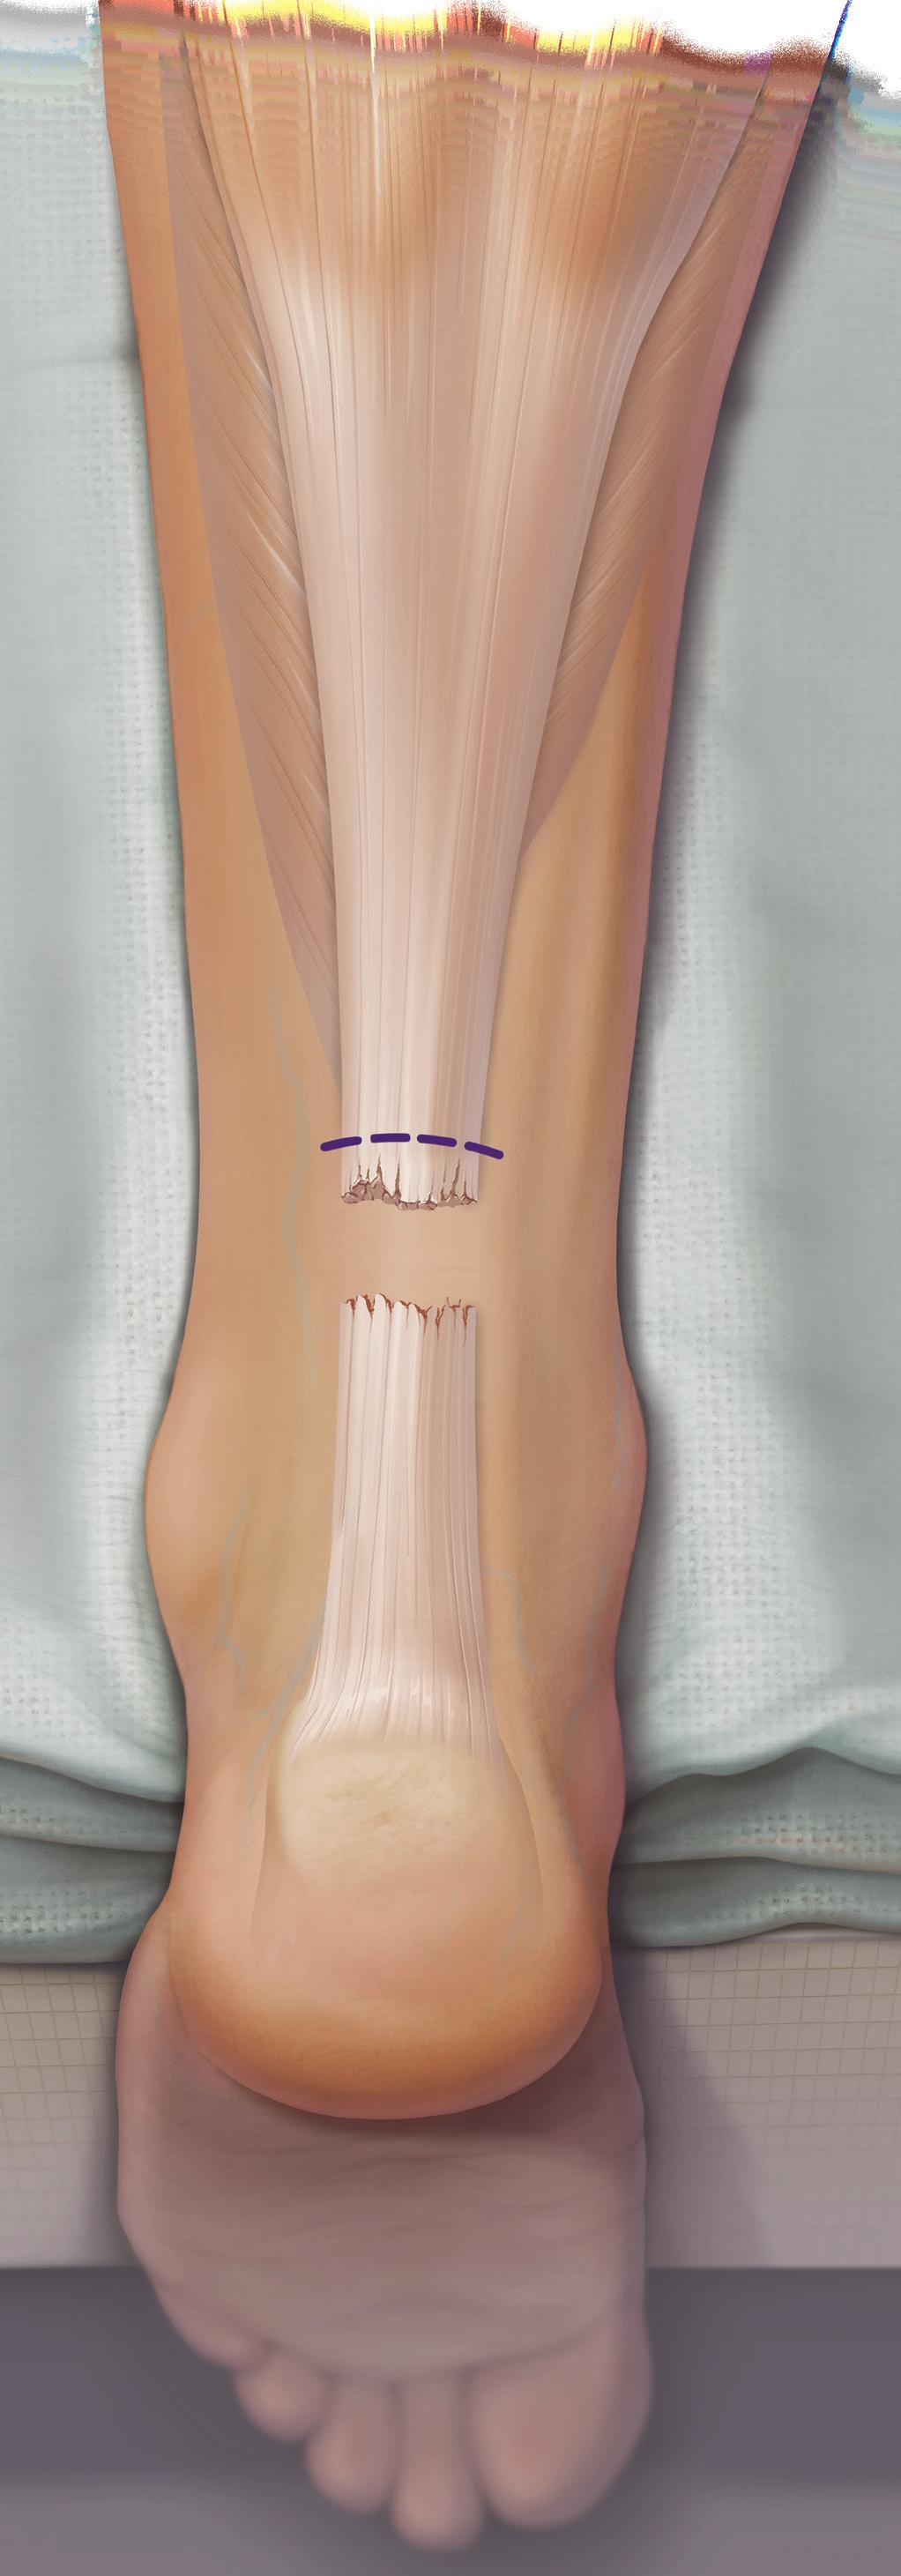 The PARS system provides the opportunity for consistently reliable capture of the proximal and distal aspects of the Achilles tendon and utilizes color-coded FiberWire suture.